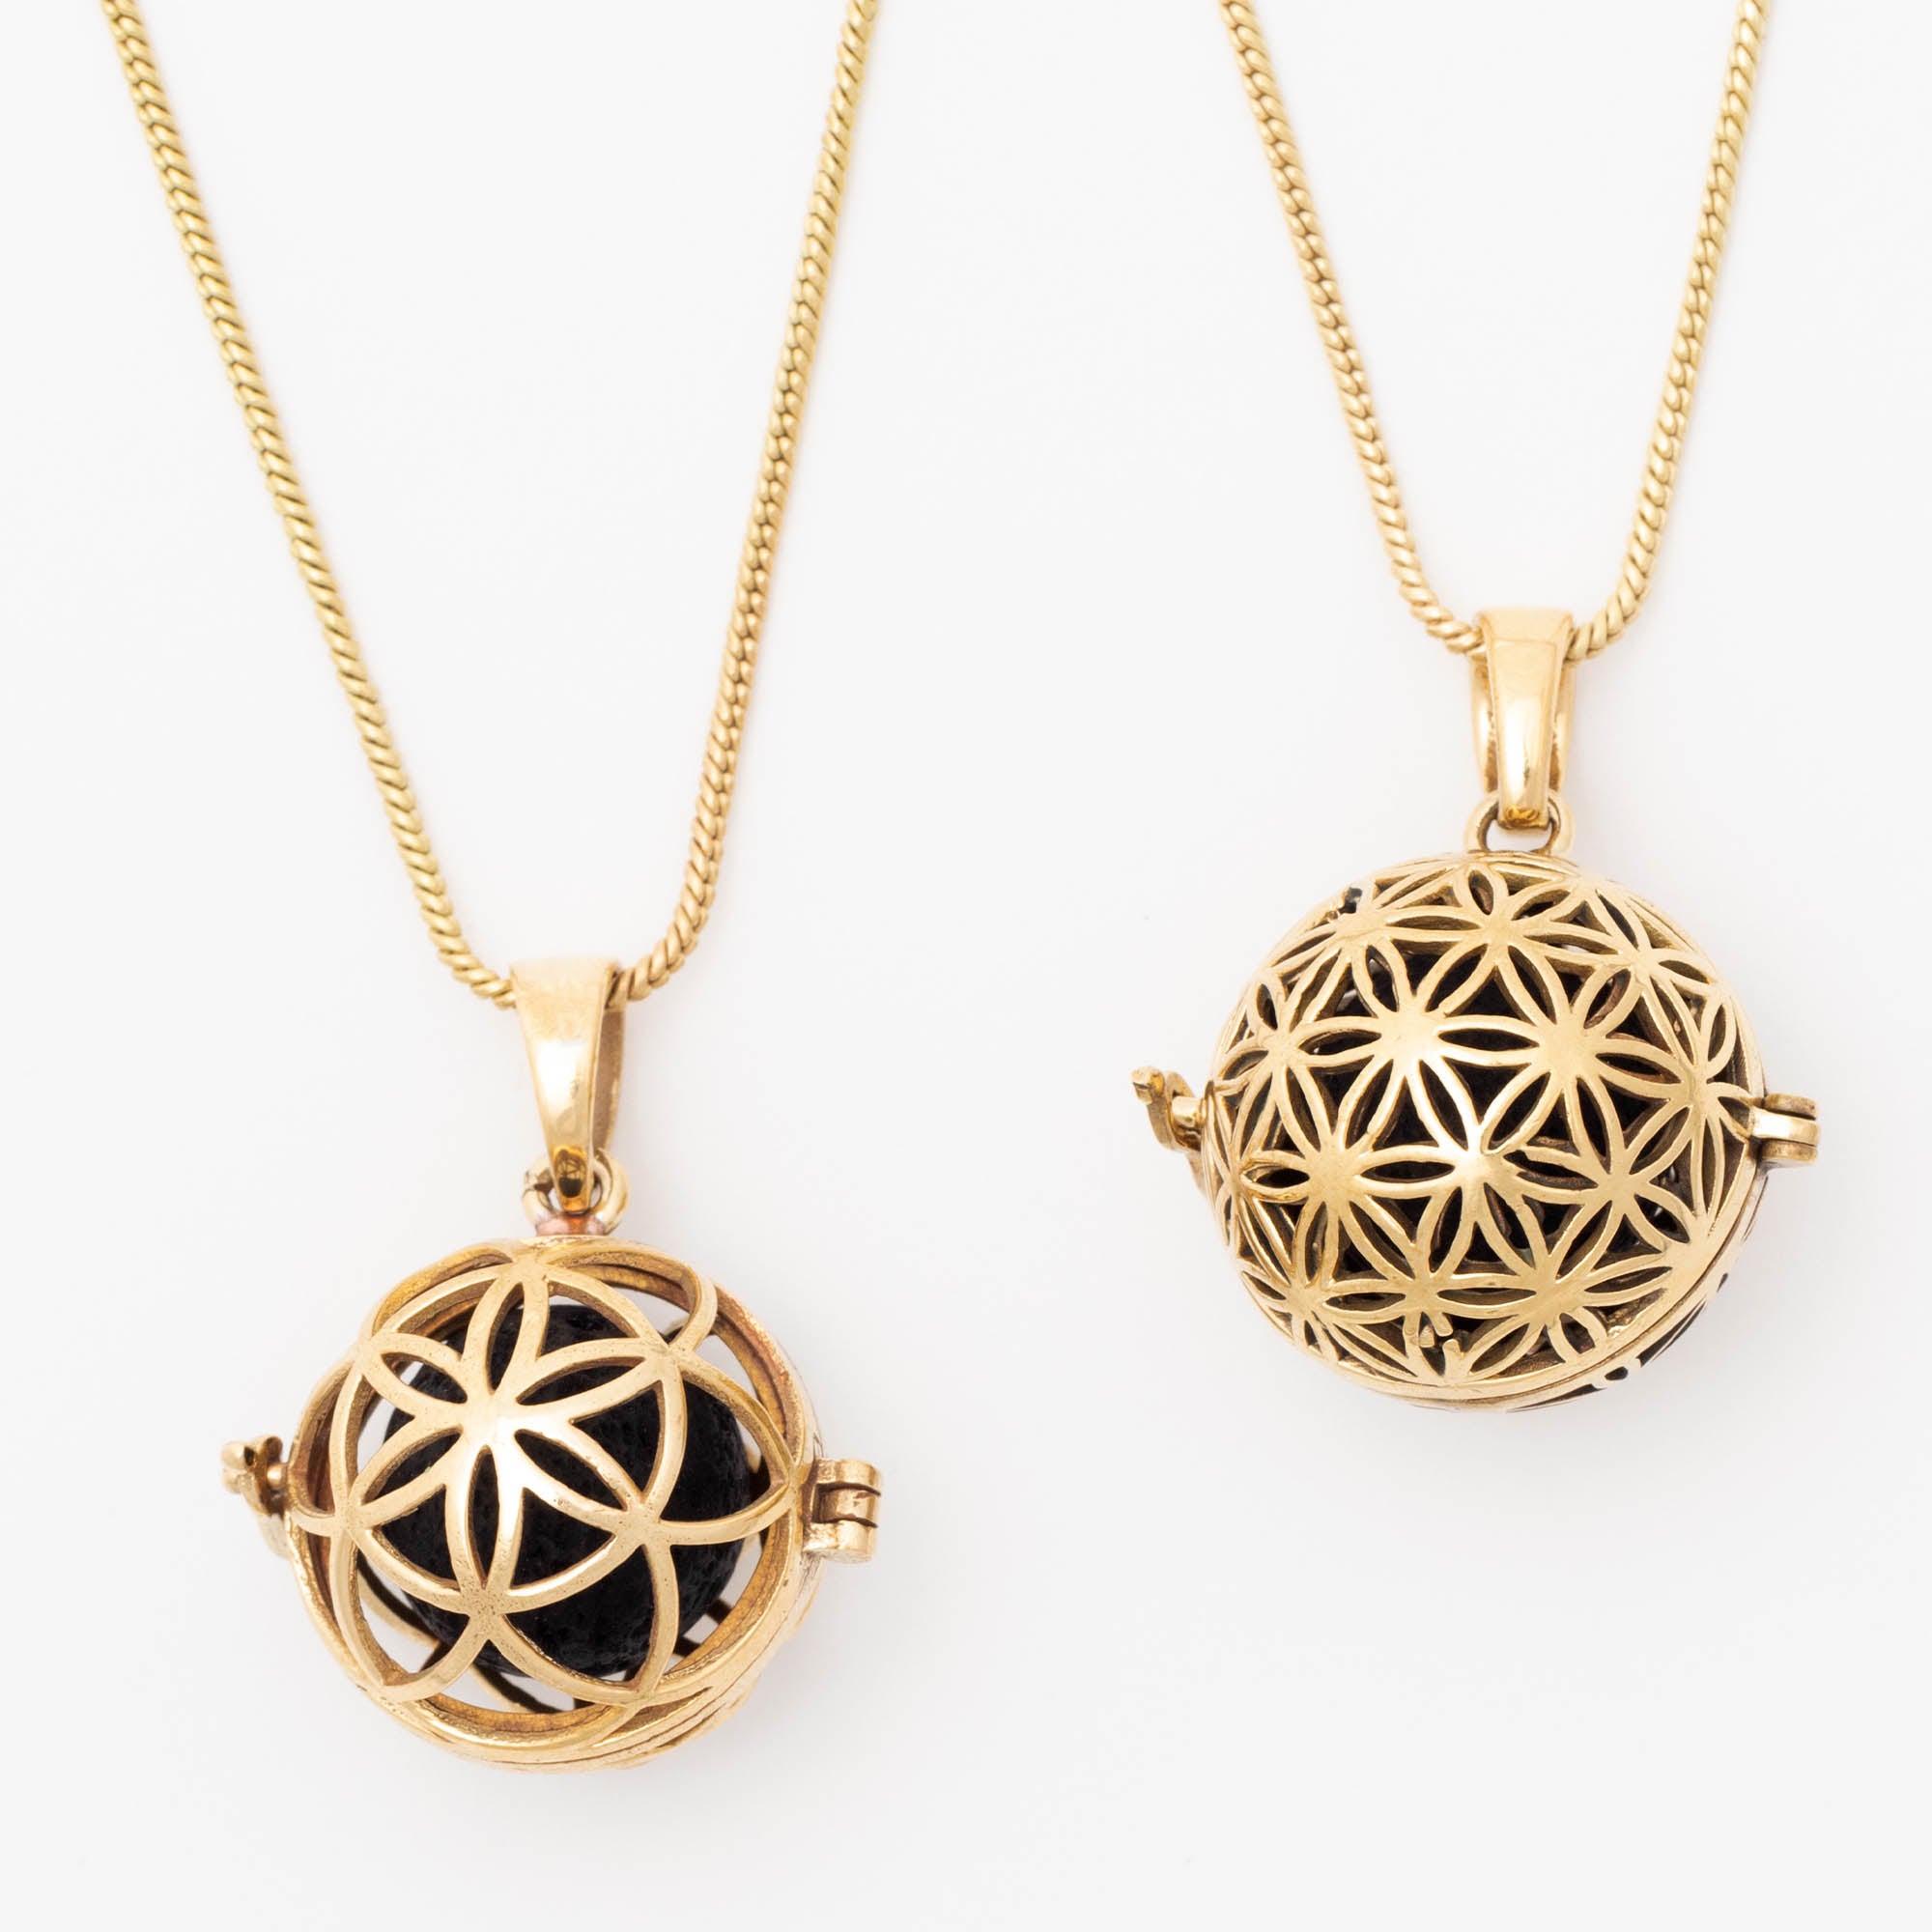 Lava Stone Diffuser Necklace - Flower Of Life